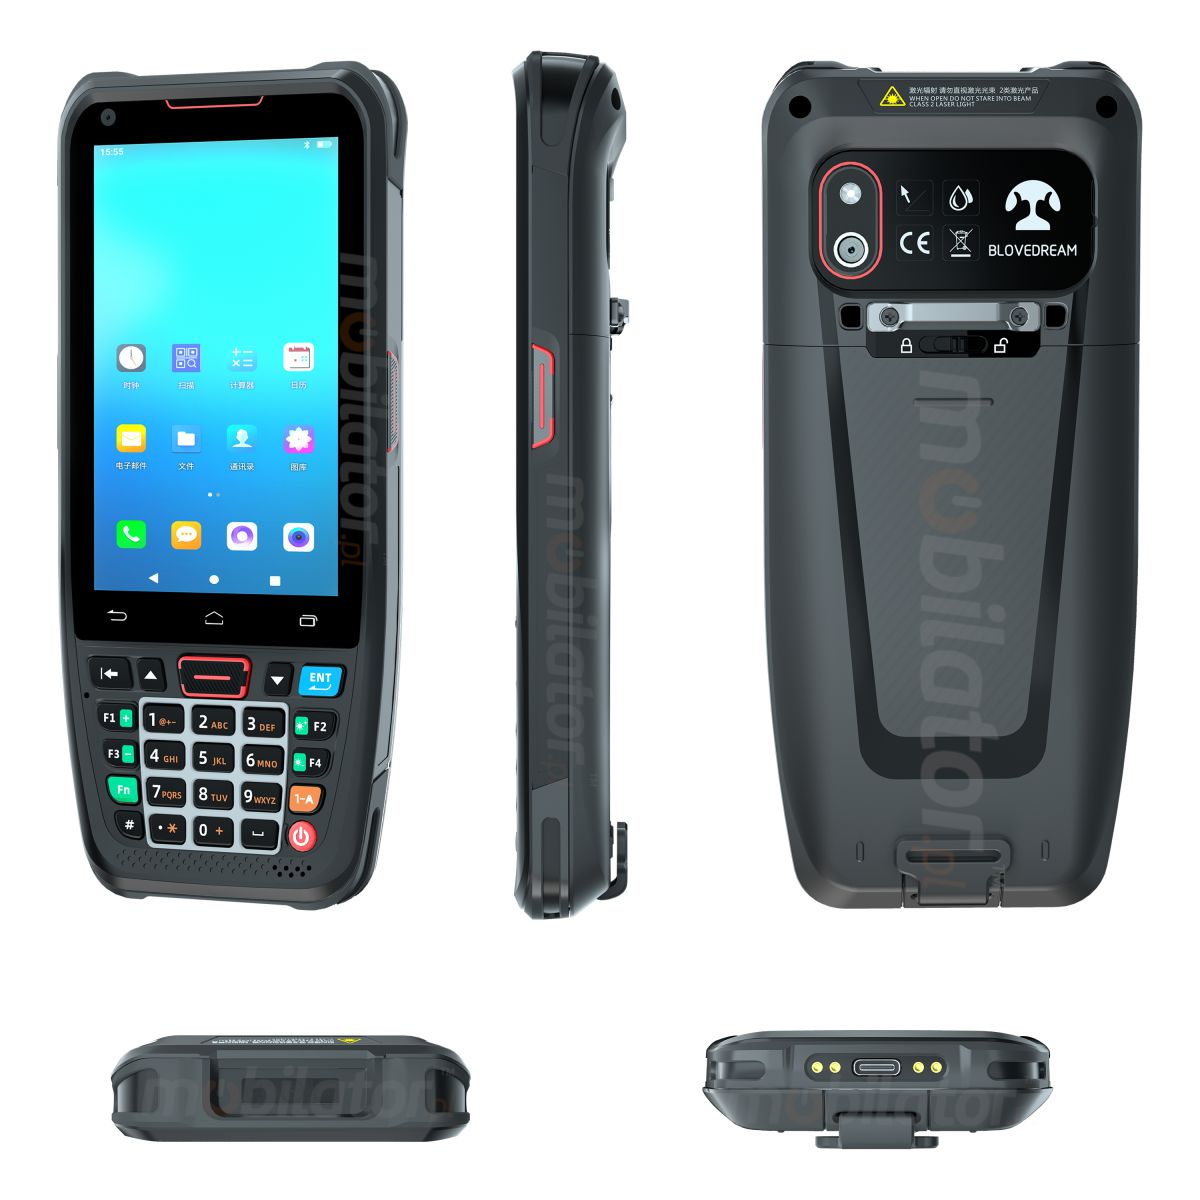 MobiPad L400N v.6 - Industrial data collector with a 4-inch screen, Android 10.0 and a 2D code reader 